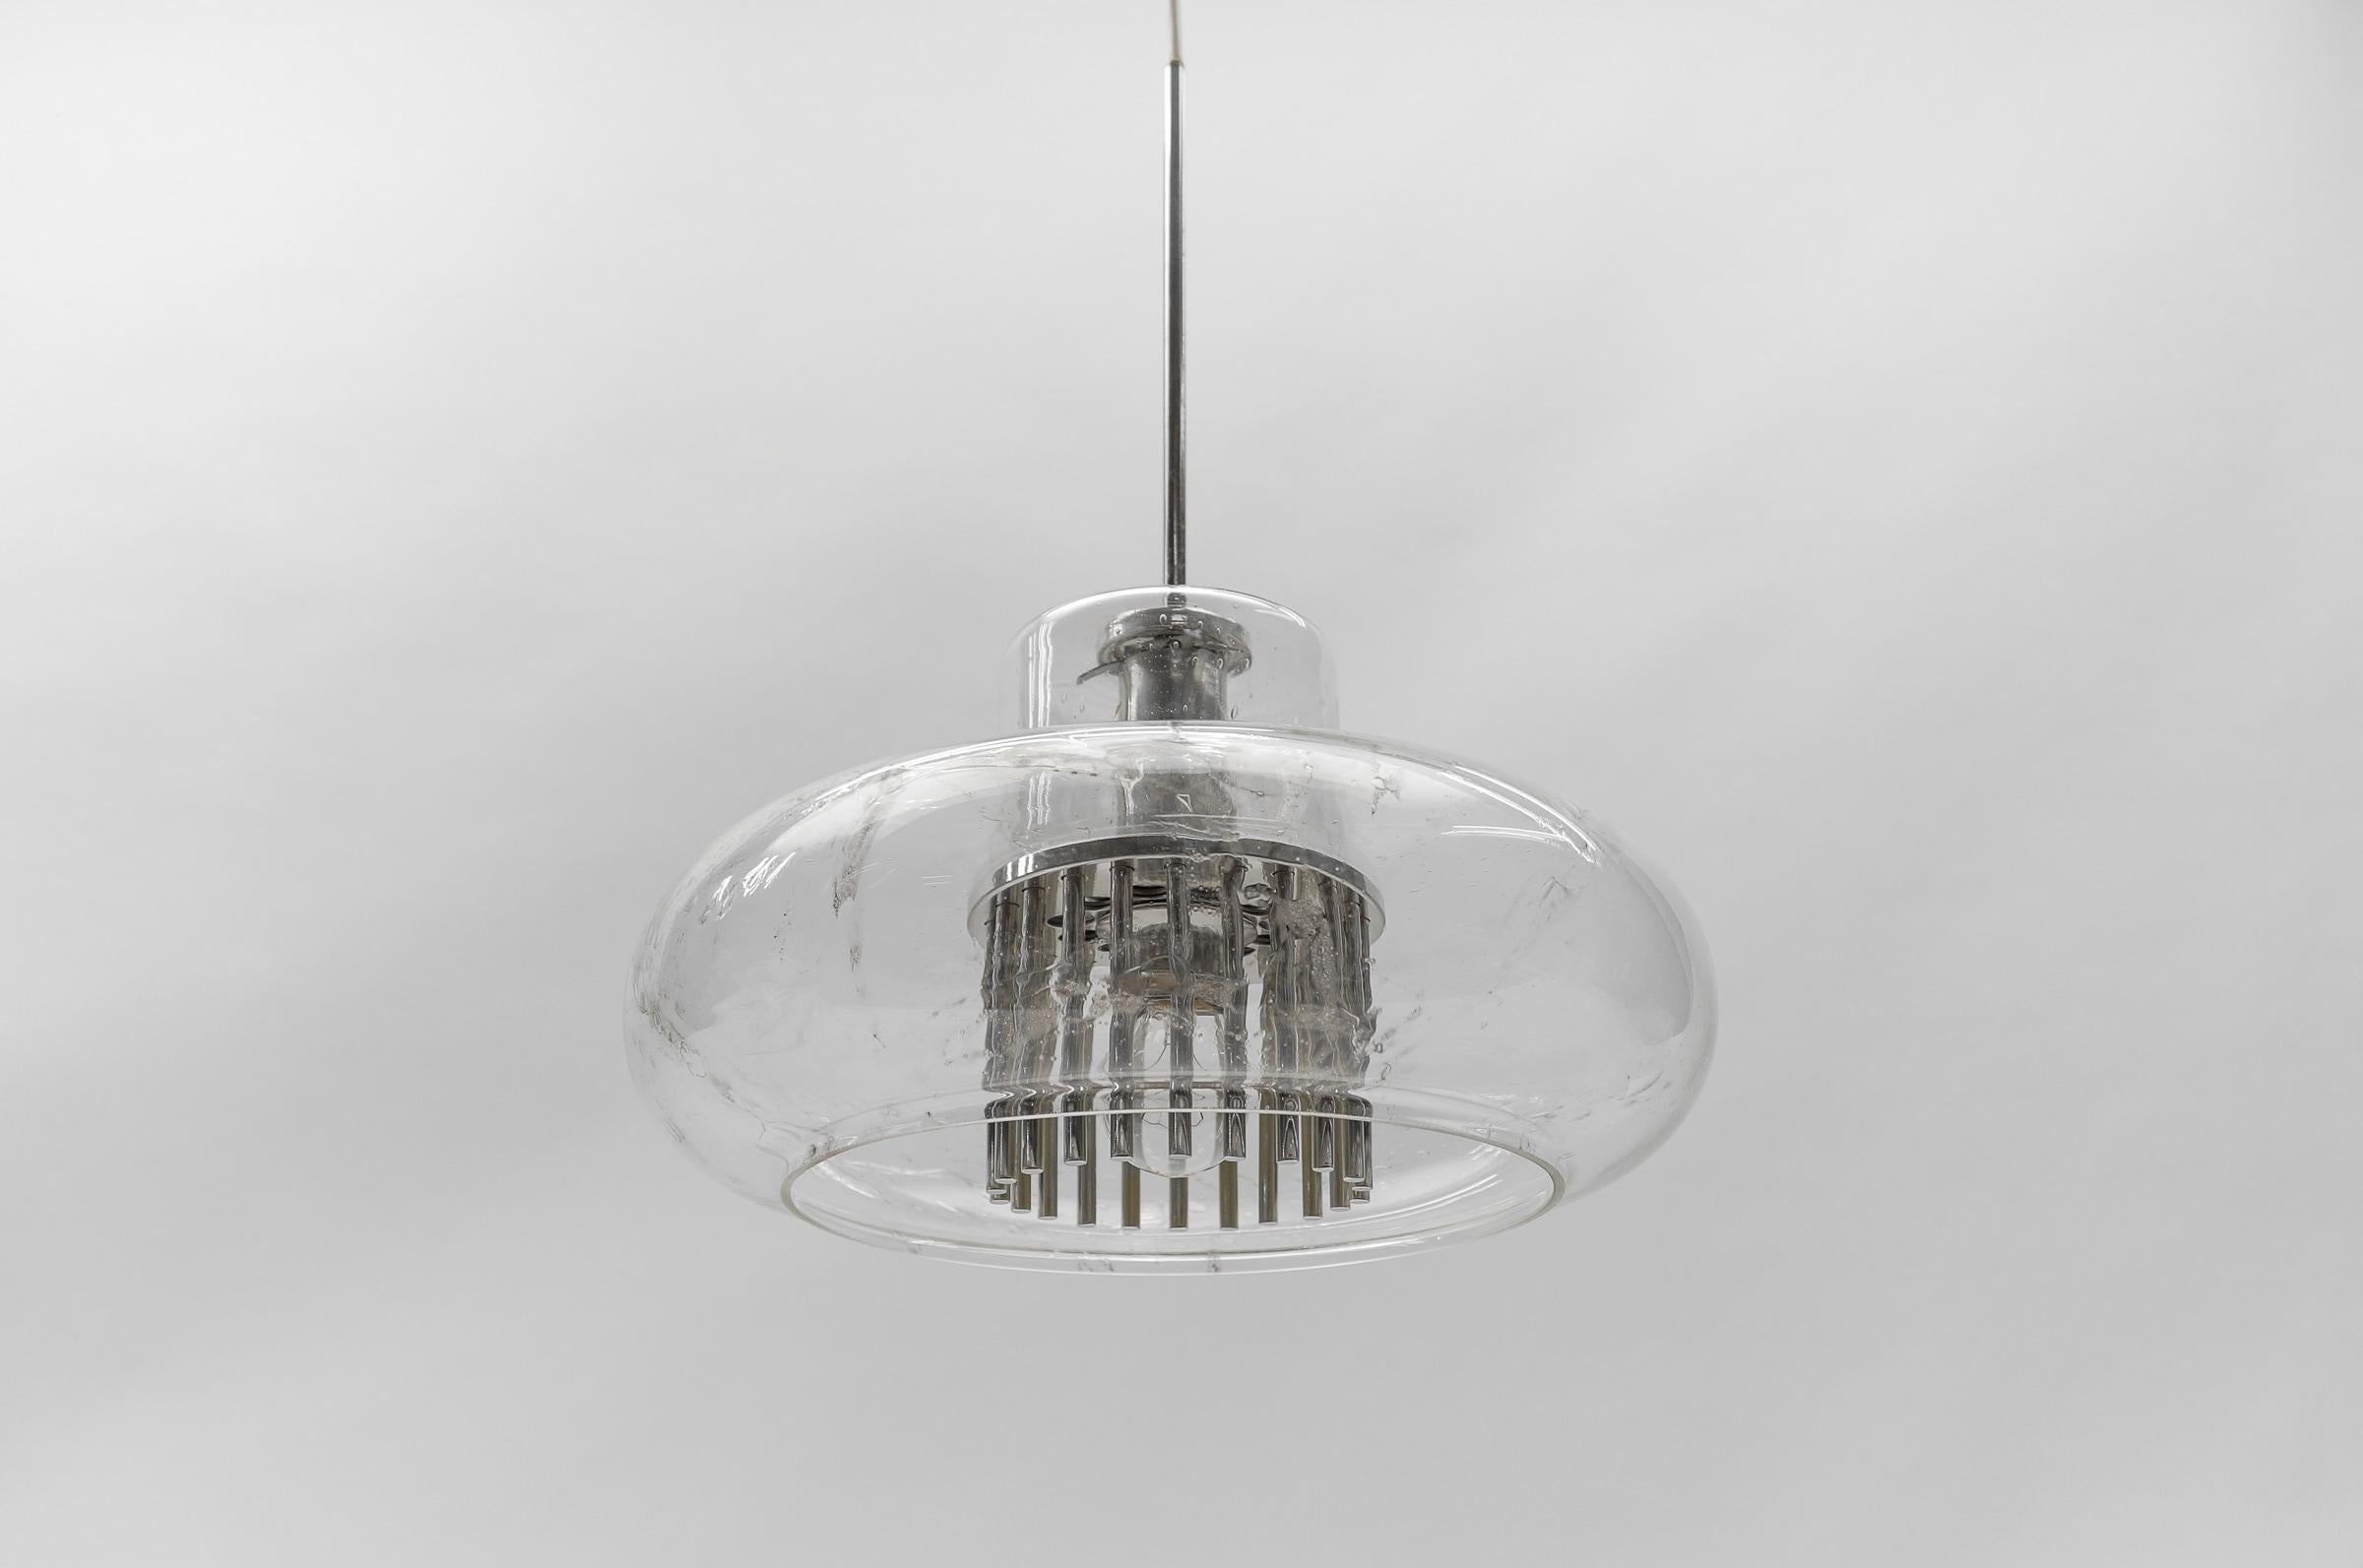 Mid Century Modern Chrome & Glass Pendant Lamp by Doria, 1960s Germany  For Sale 1